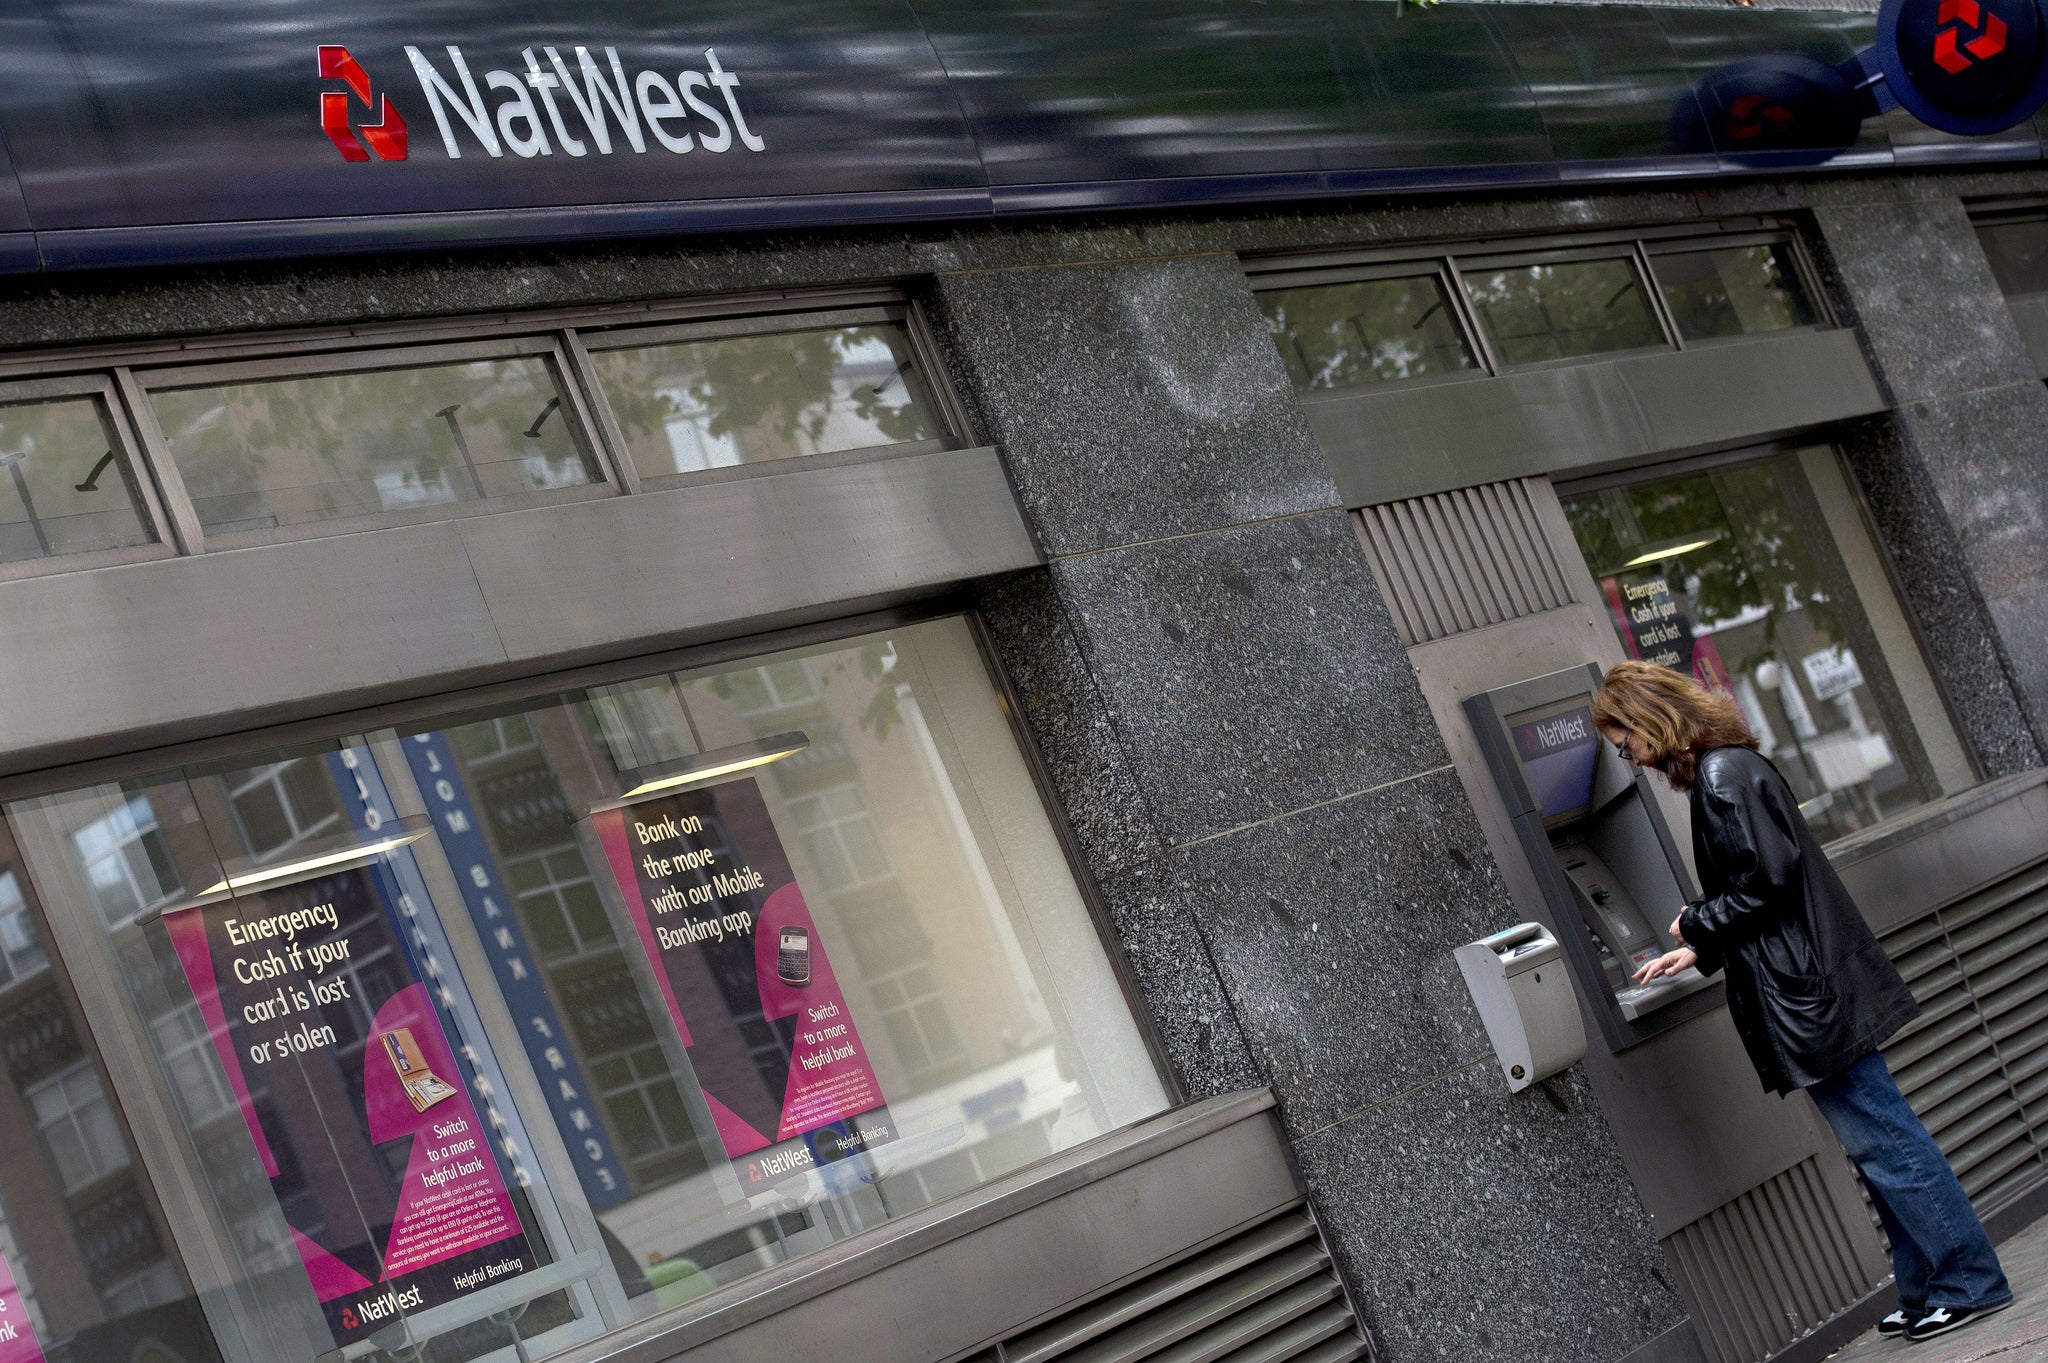 Customers with Natwest and RBS banks were unable to withdraw money from cash machines at other banks for two-and-a-half hours